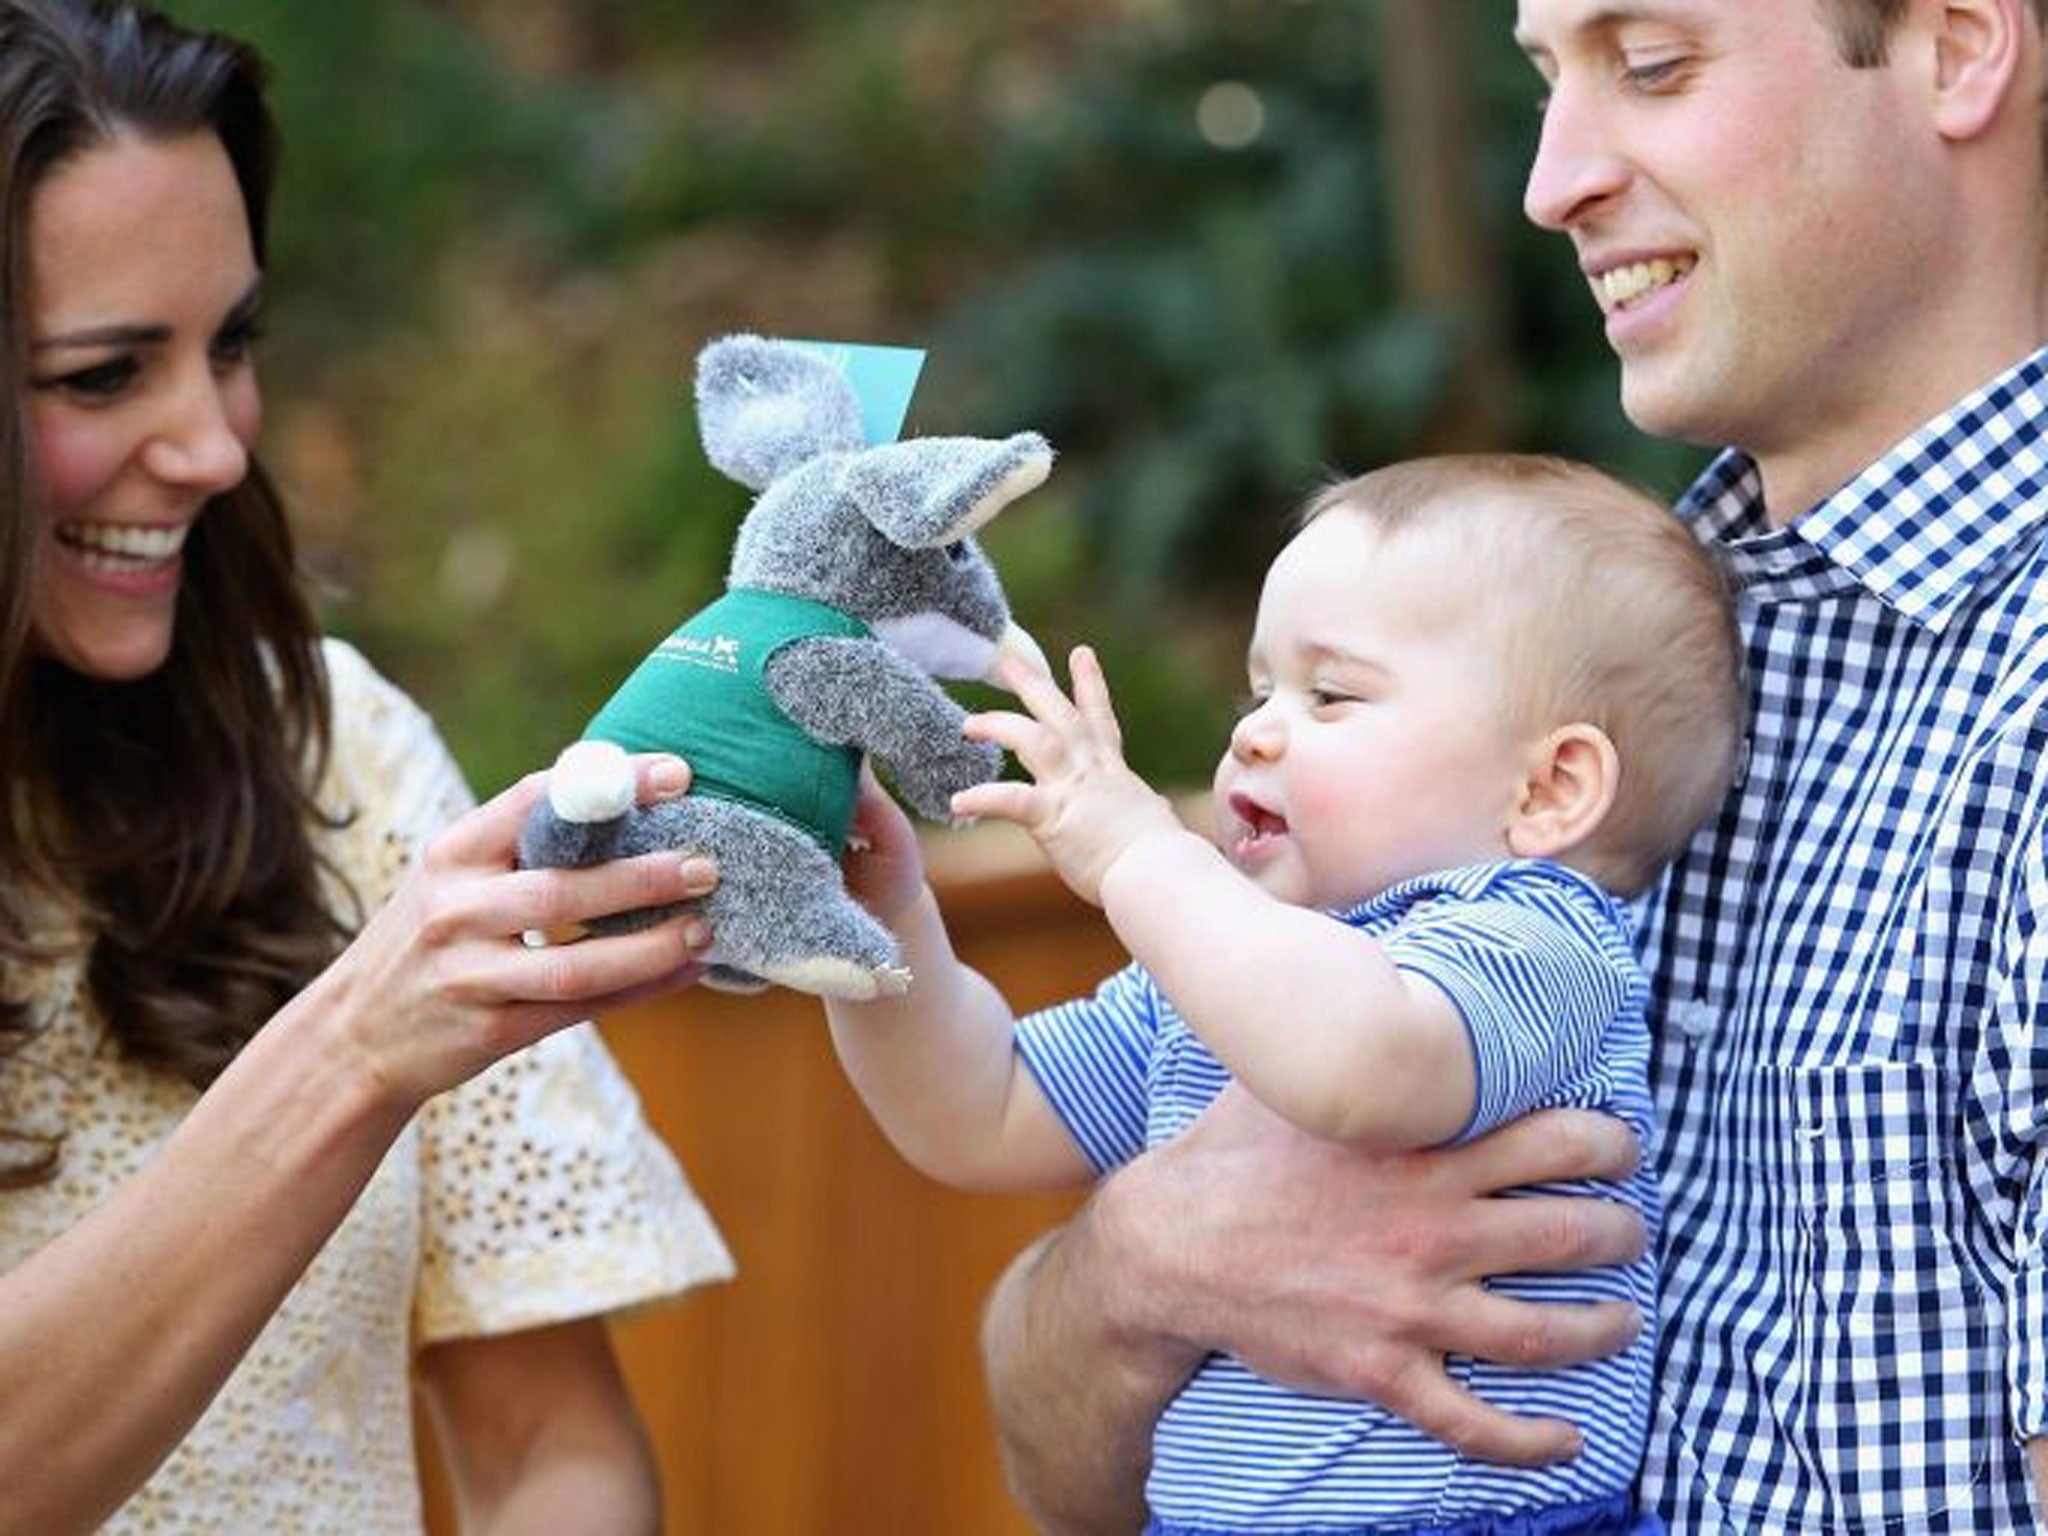 The Duke and Duchess of Cambridge with Prince George of Cambridge holding toy bilby at the unveiling a plaque, opening the Bilby enclosure during a visit to at Taronga Zoo in Sydney, Australia, the Duke and Duchess of Cambridge are on a three-week tour of